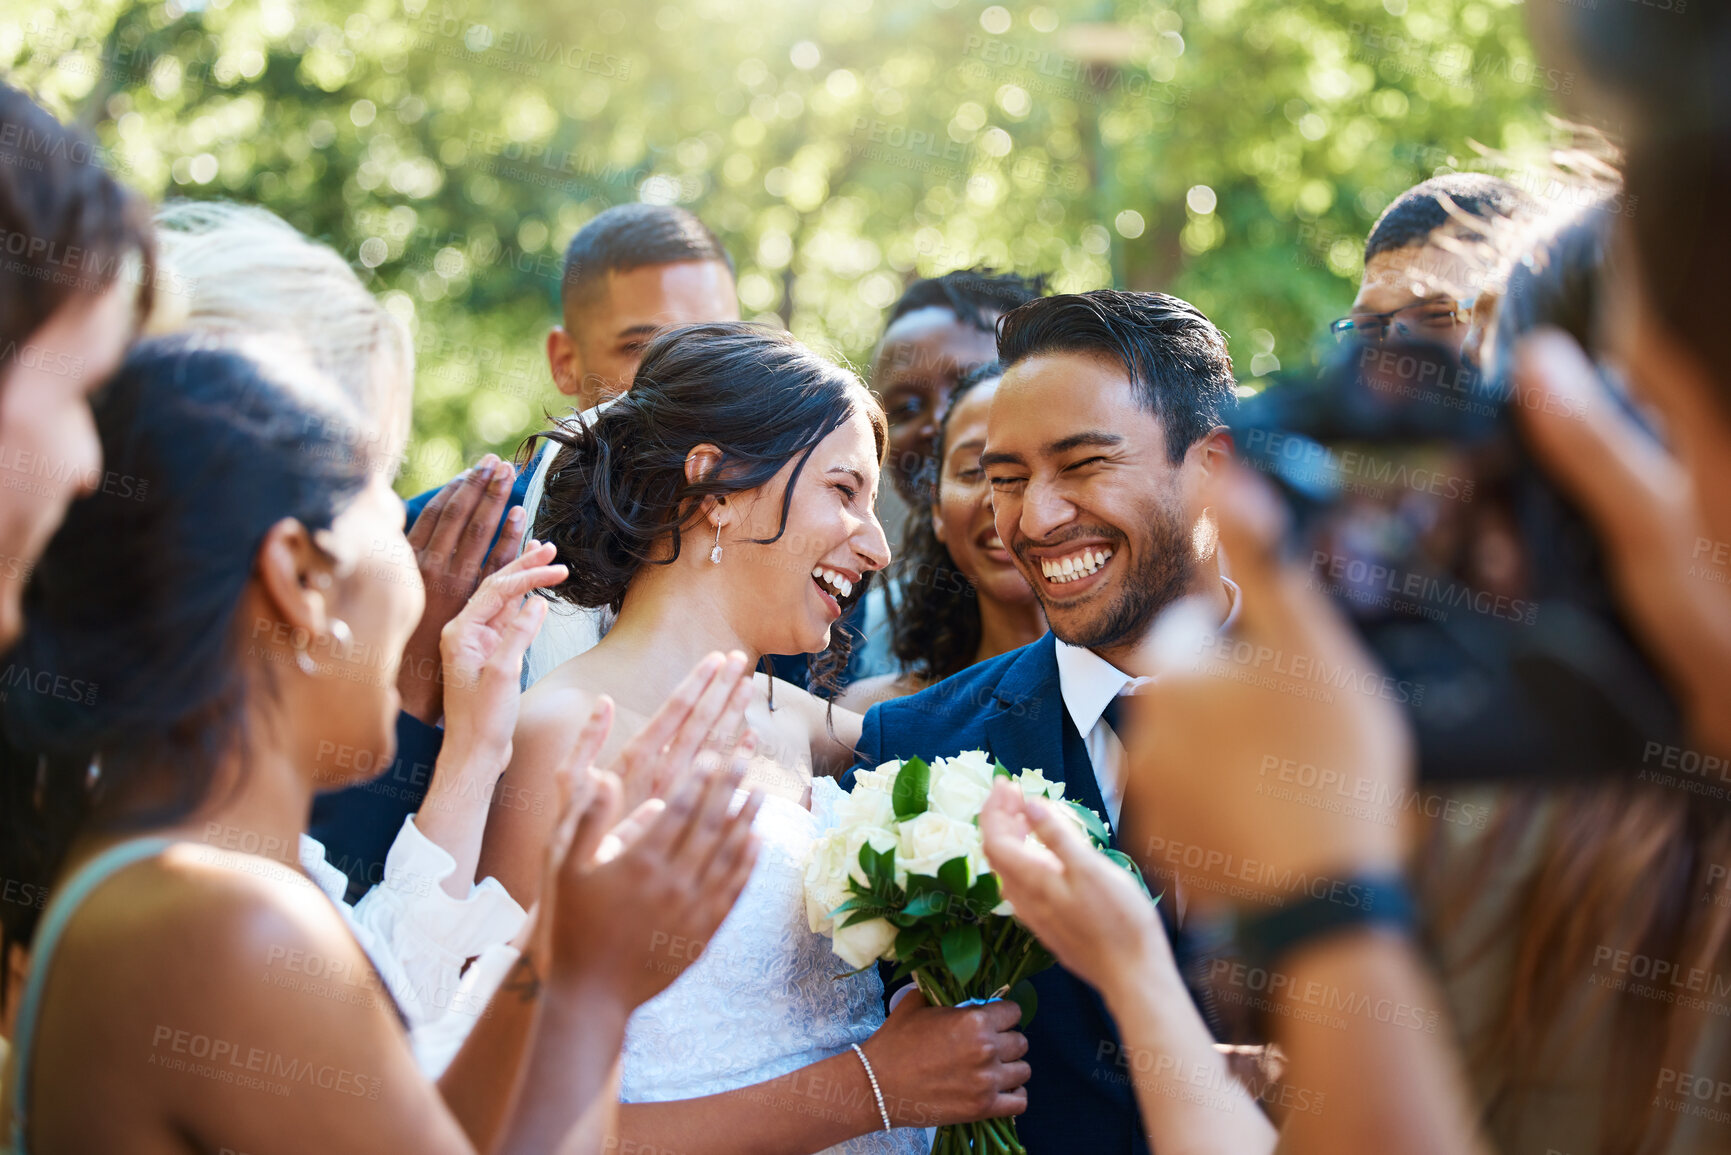 Buy stock photo Bride and groom looking joyful while surround by friends and family on their wedding day. Photographer capturing special moment as newlyweds and guests stand together